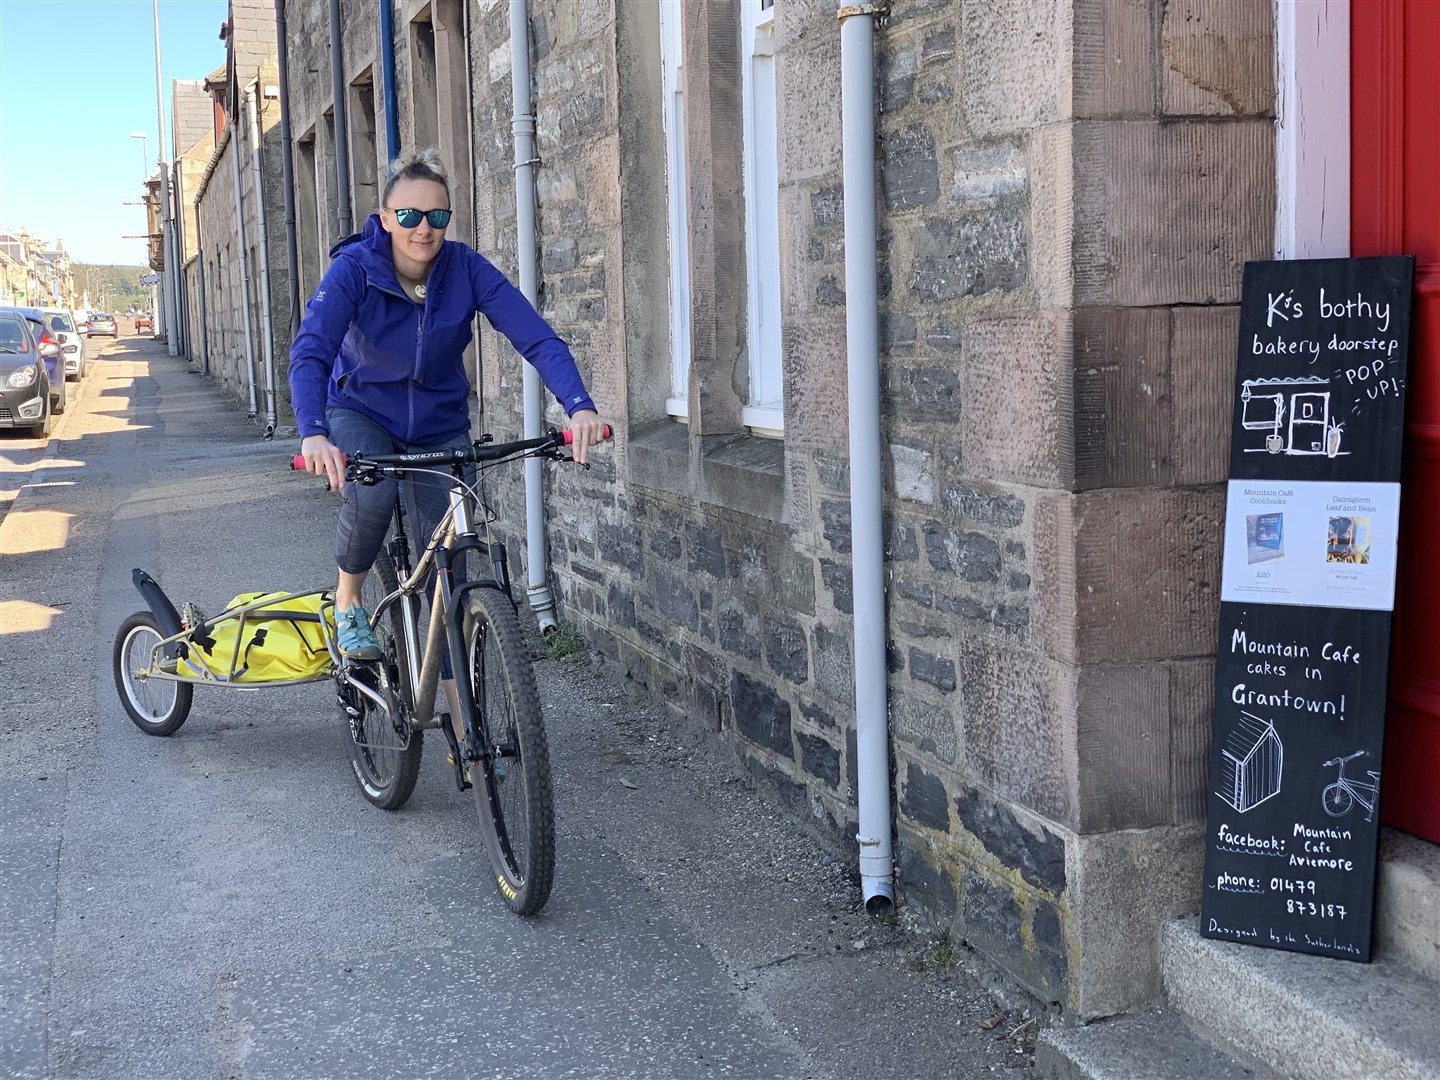 After leaving Aviemore's hugely popular Mountain Cafe, Kirsten Gilmour got on her bike at Grantown to keep cakes and loaves coming